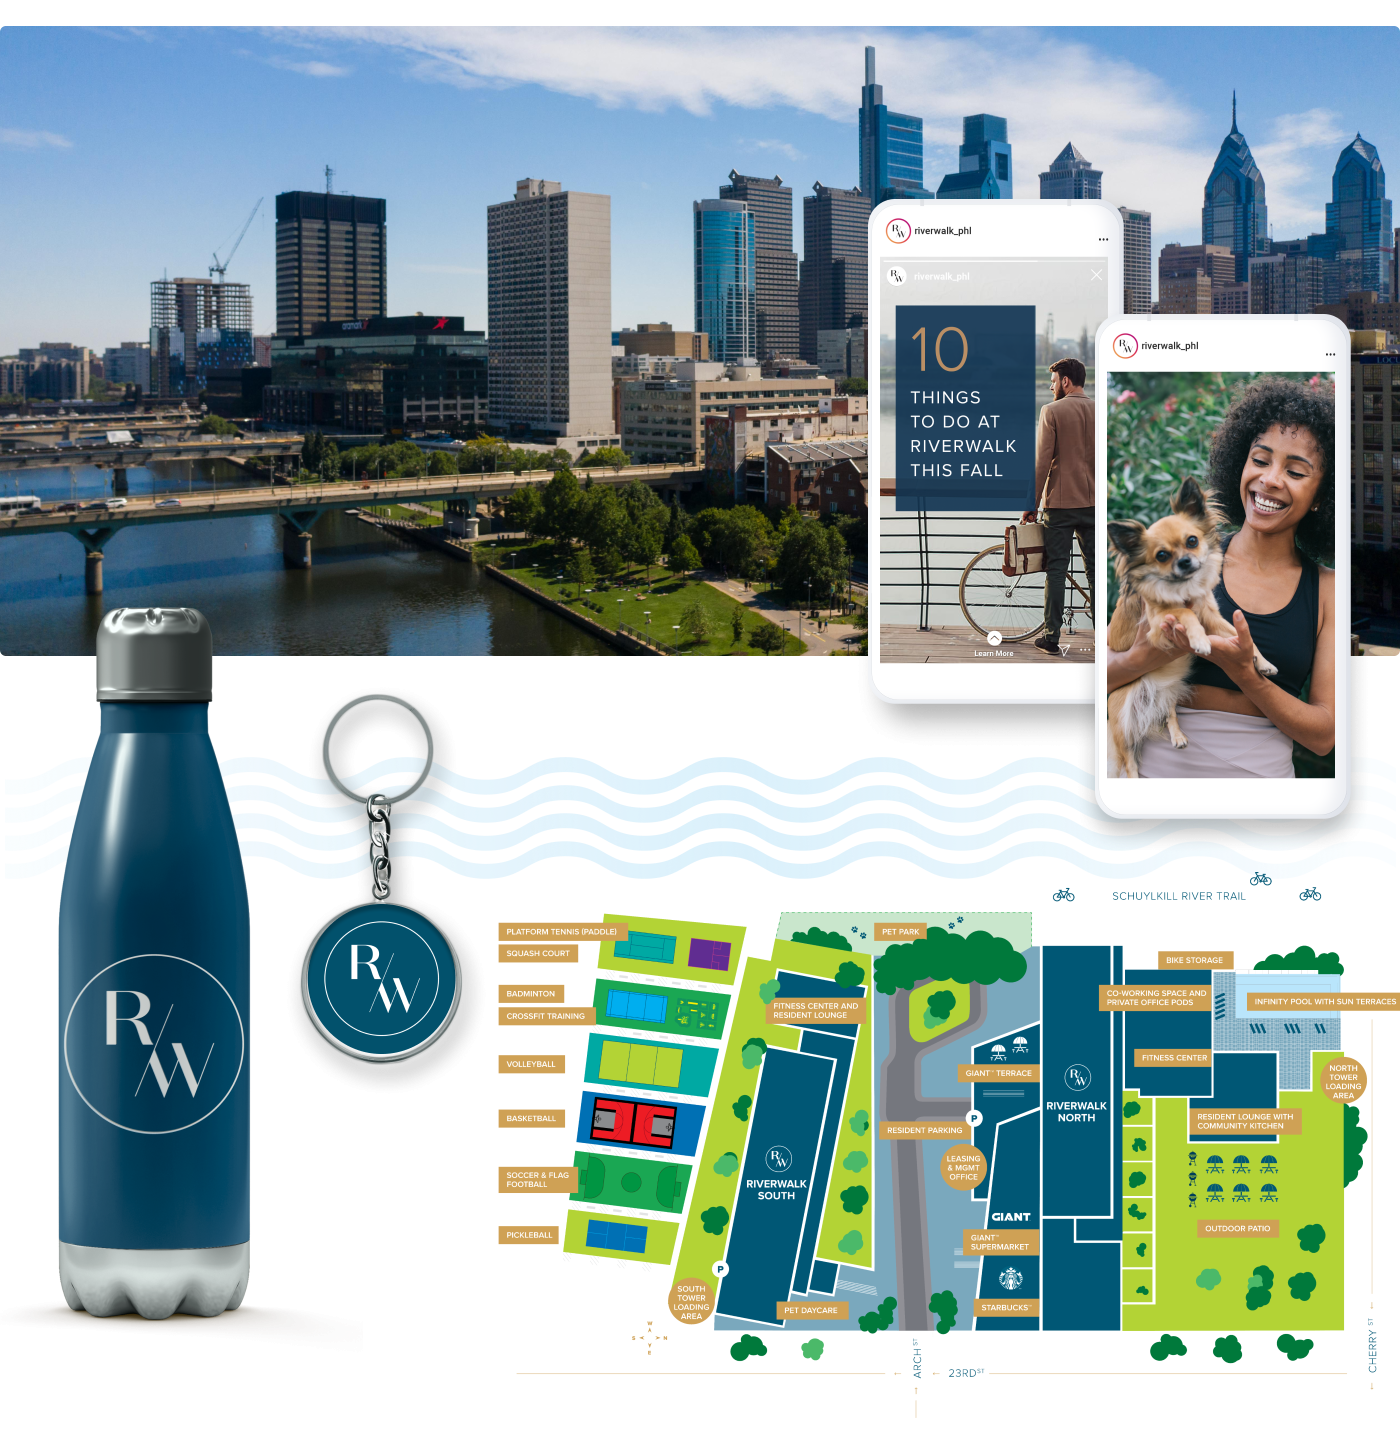 collage with the Riverwalk website on two mobile devices in front of a photo of the Philadelphia skyline and beneath it the R/W logo on a water bottle and keychain plus the illustrated property map